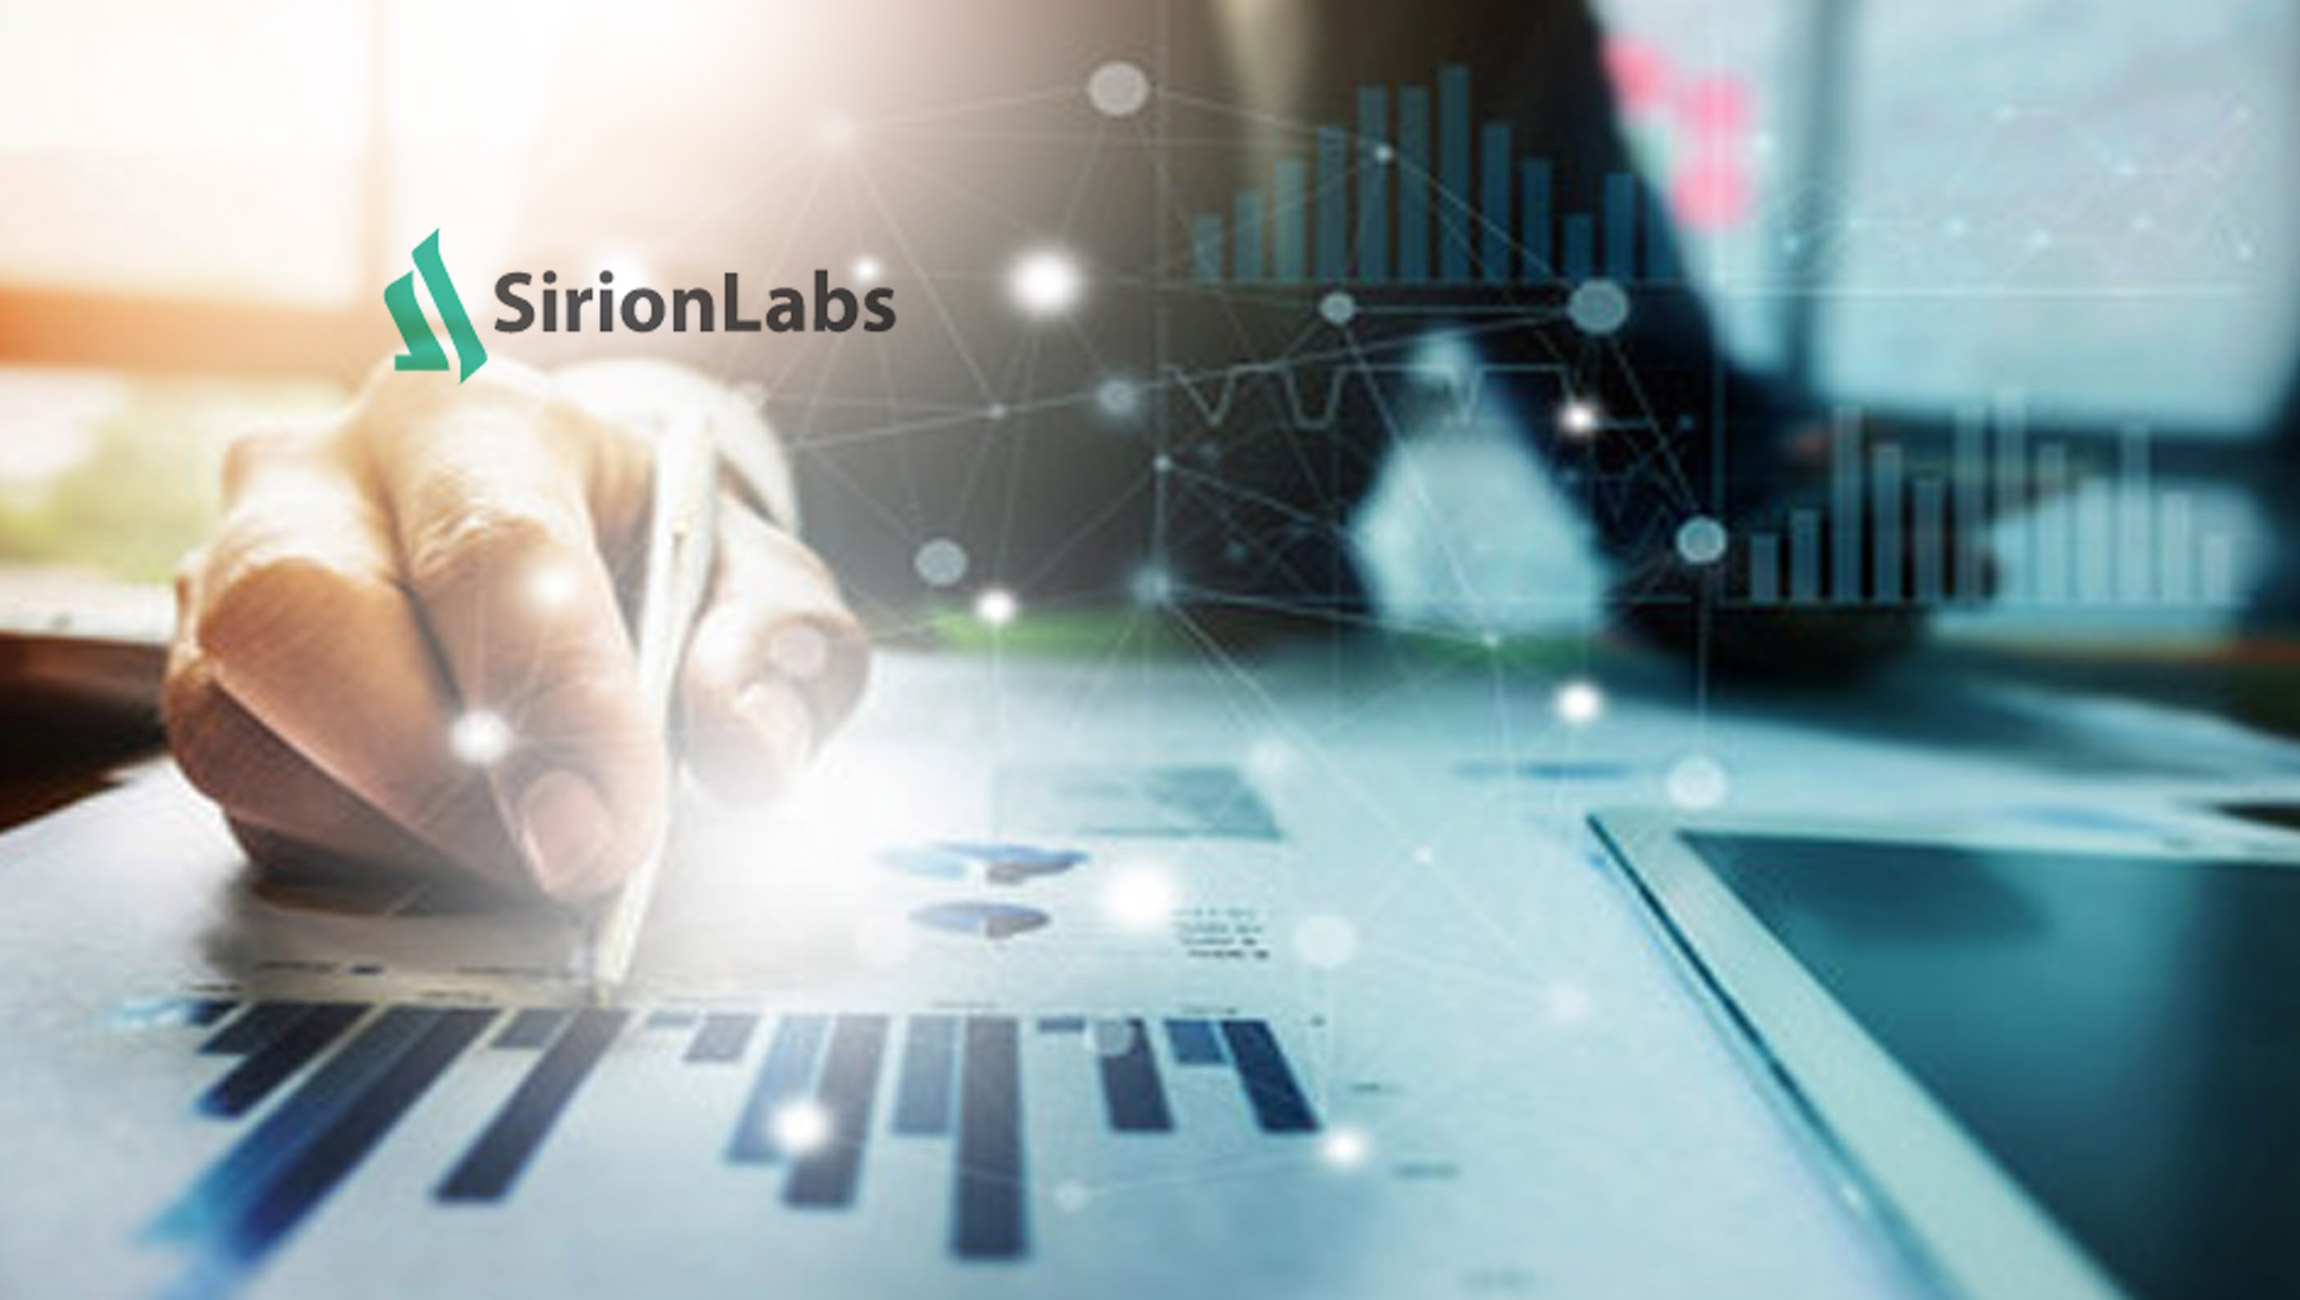 SirionLabs Secures $85M to Accelerate Growth and Leadership in the Enterprise Contract Lifecycle Management Market